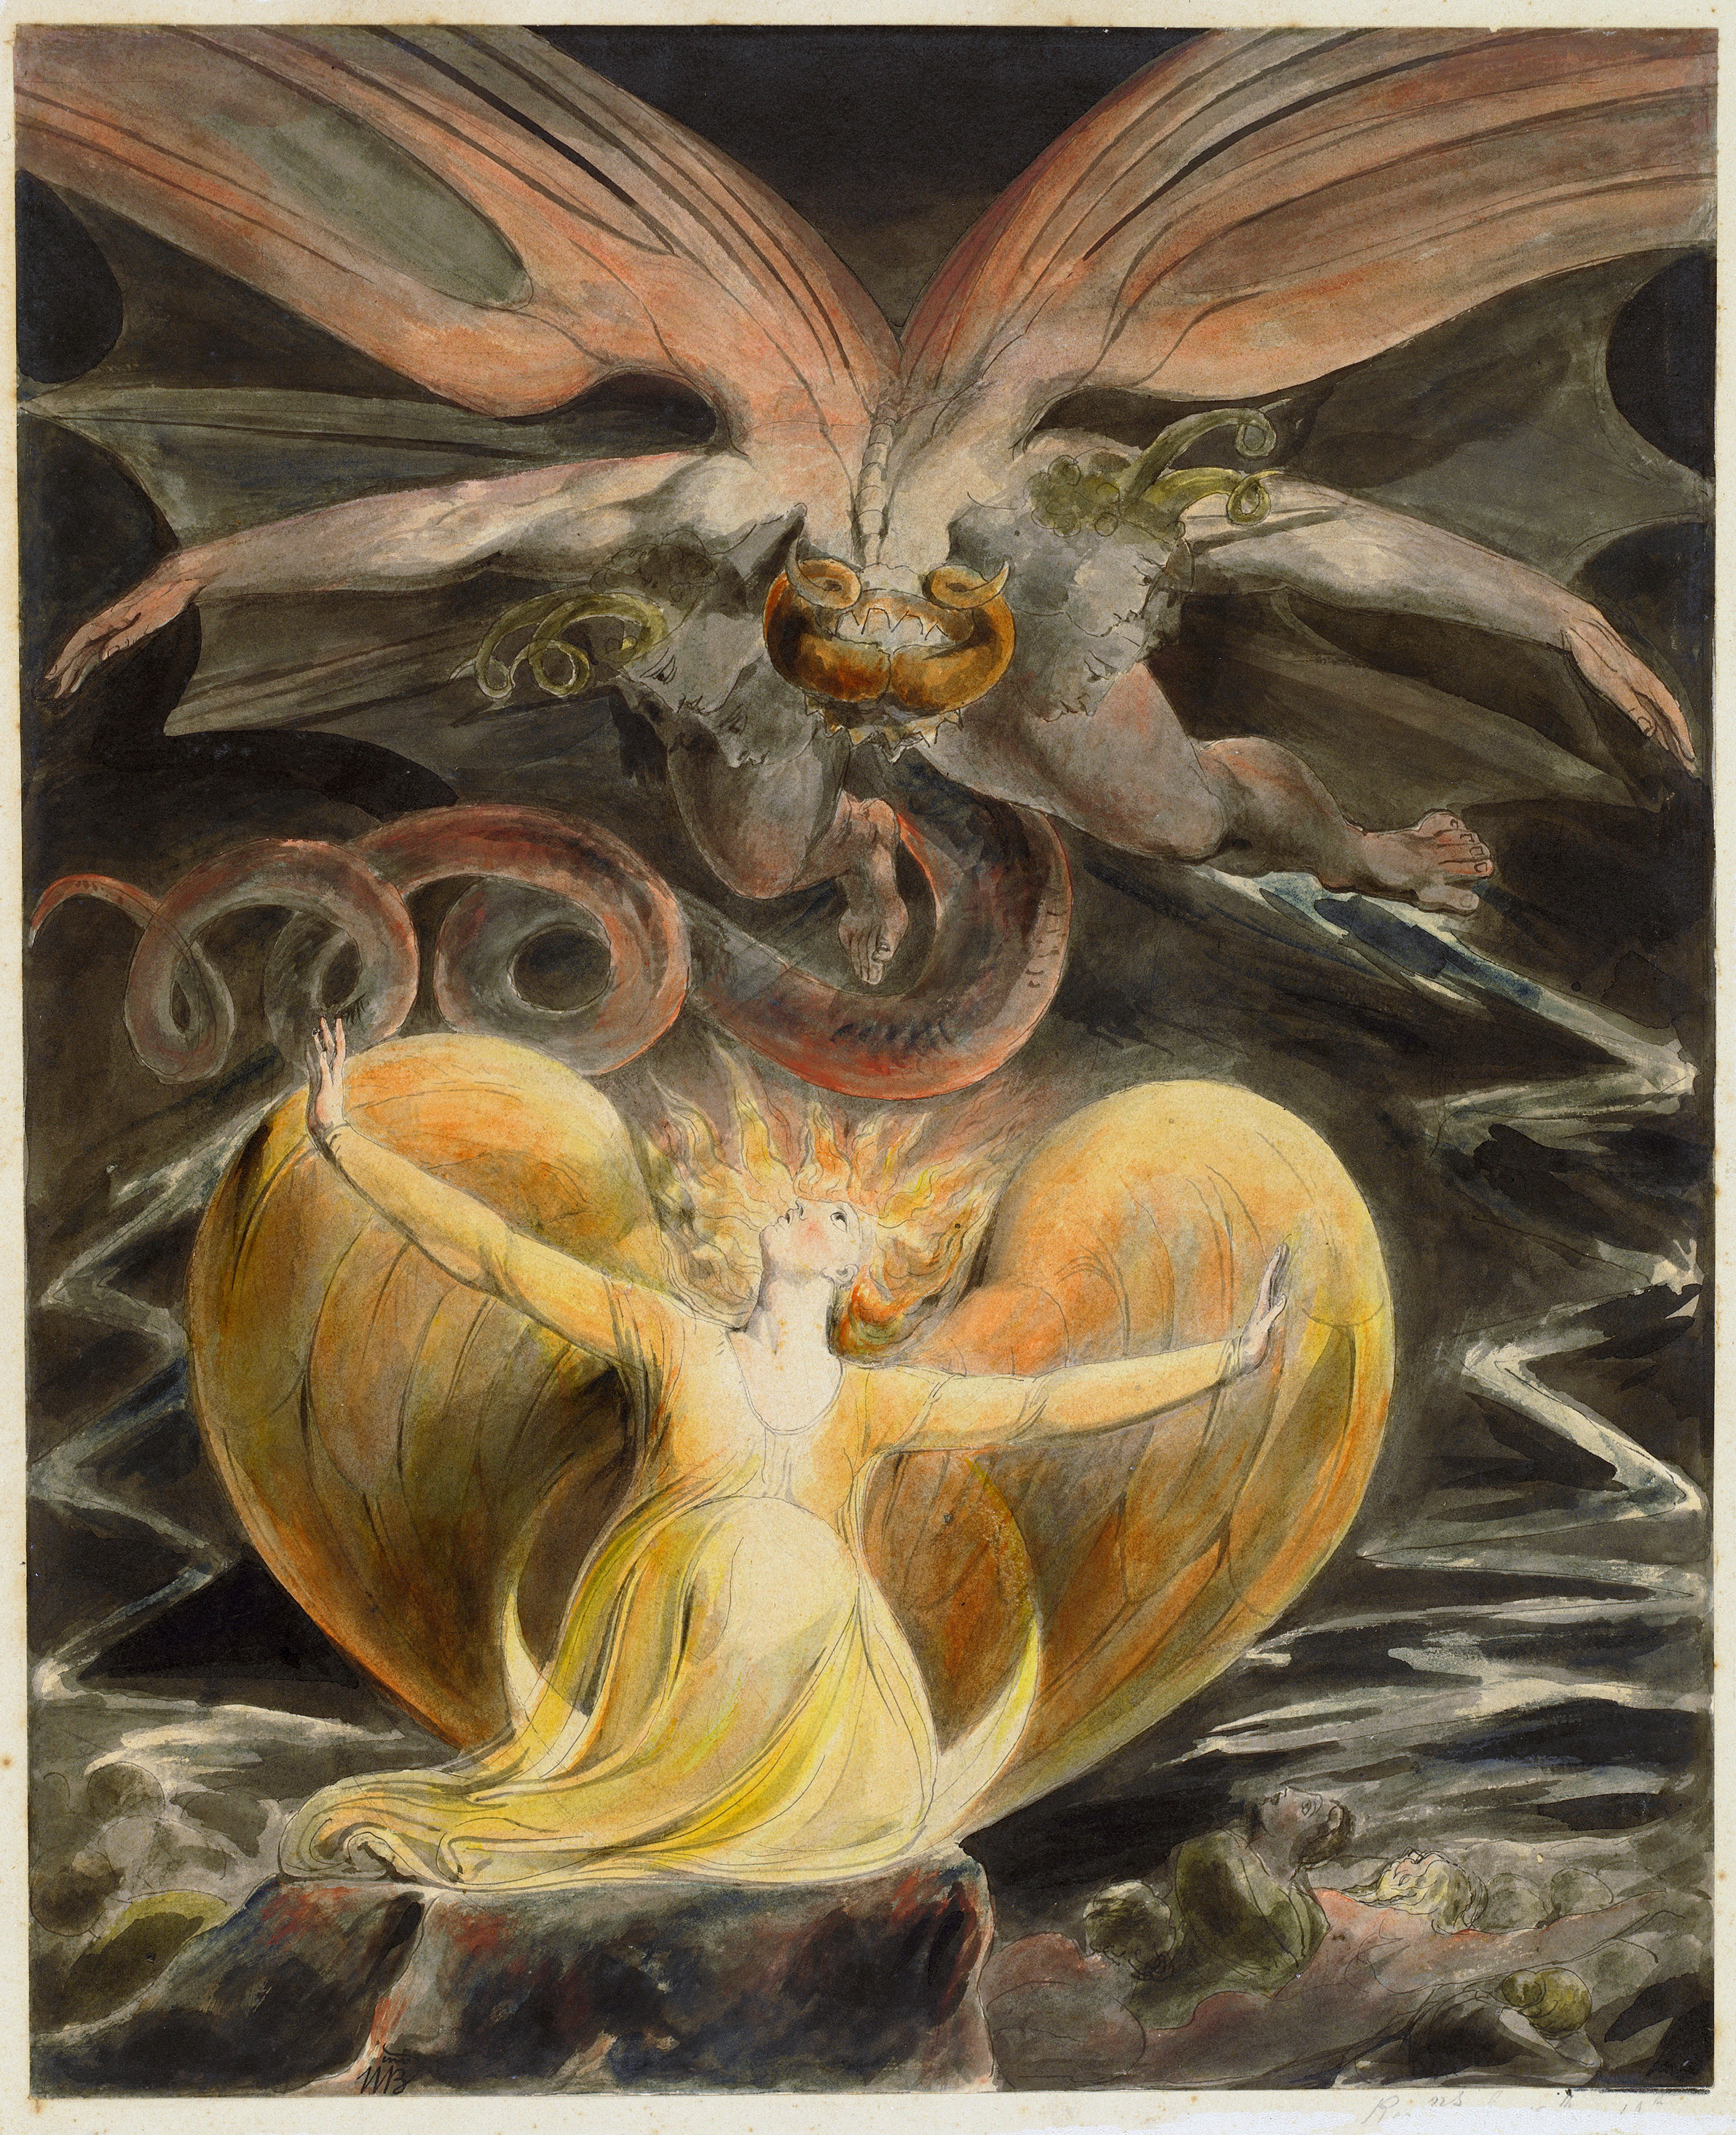 The Great Red Dragon and the Woman Clothed with the Sun by William Blake - 1805 - 40.8 x 33.7 cm 